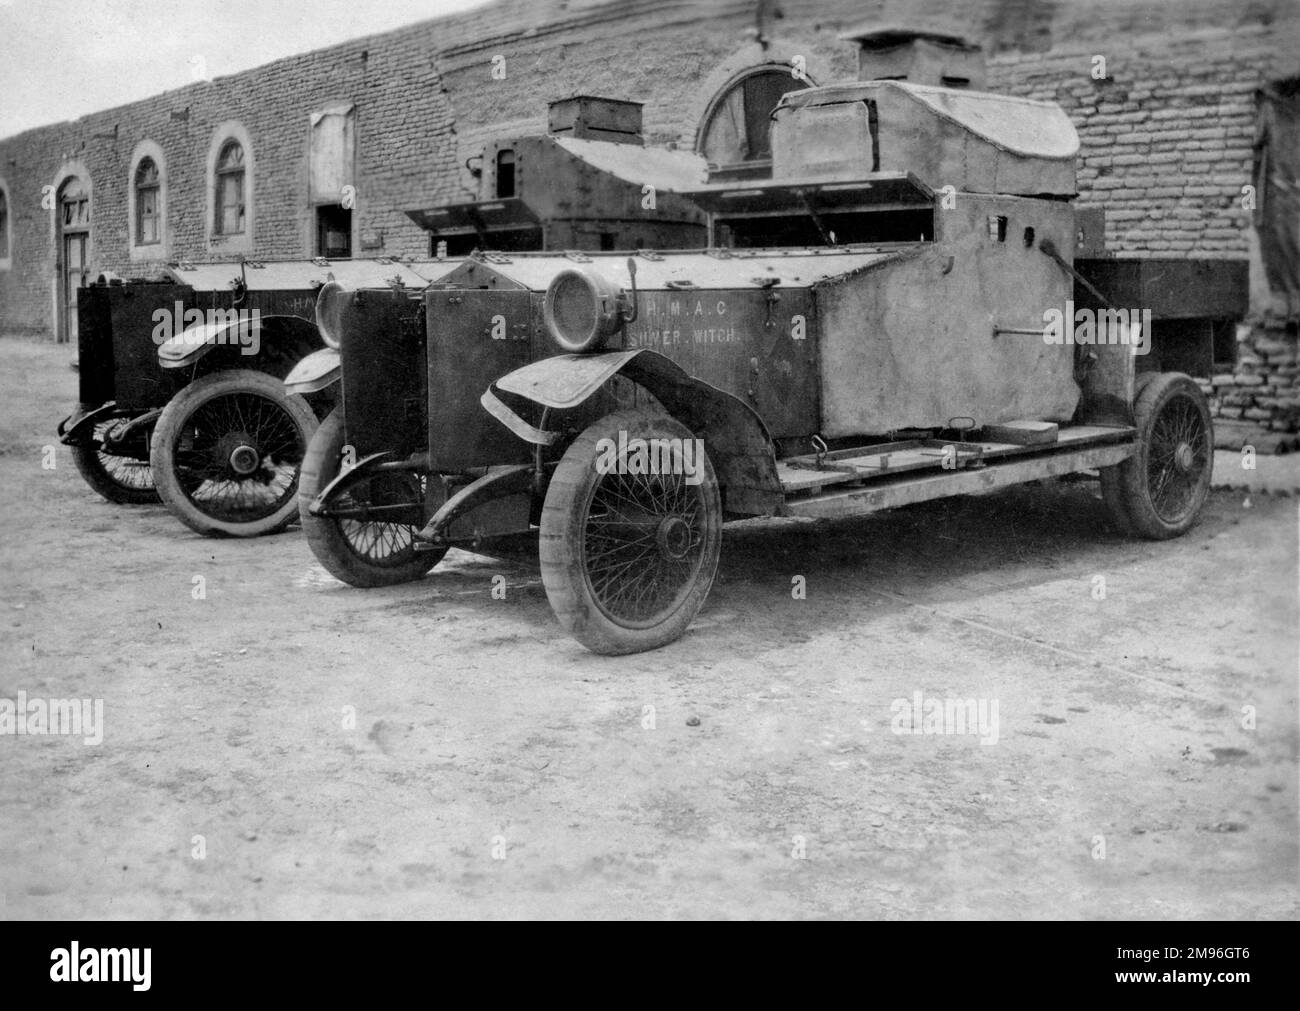 WW1 - Two armour plated army vehicles, labelled HMAC Silver Witch. Stock Photo